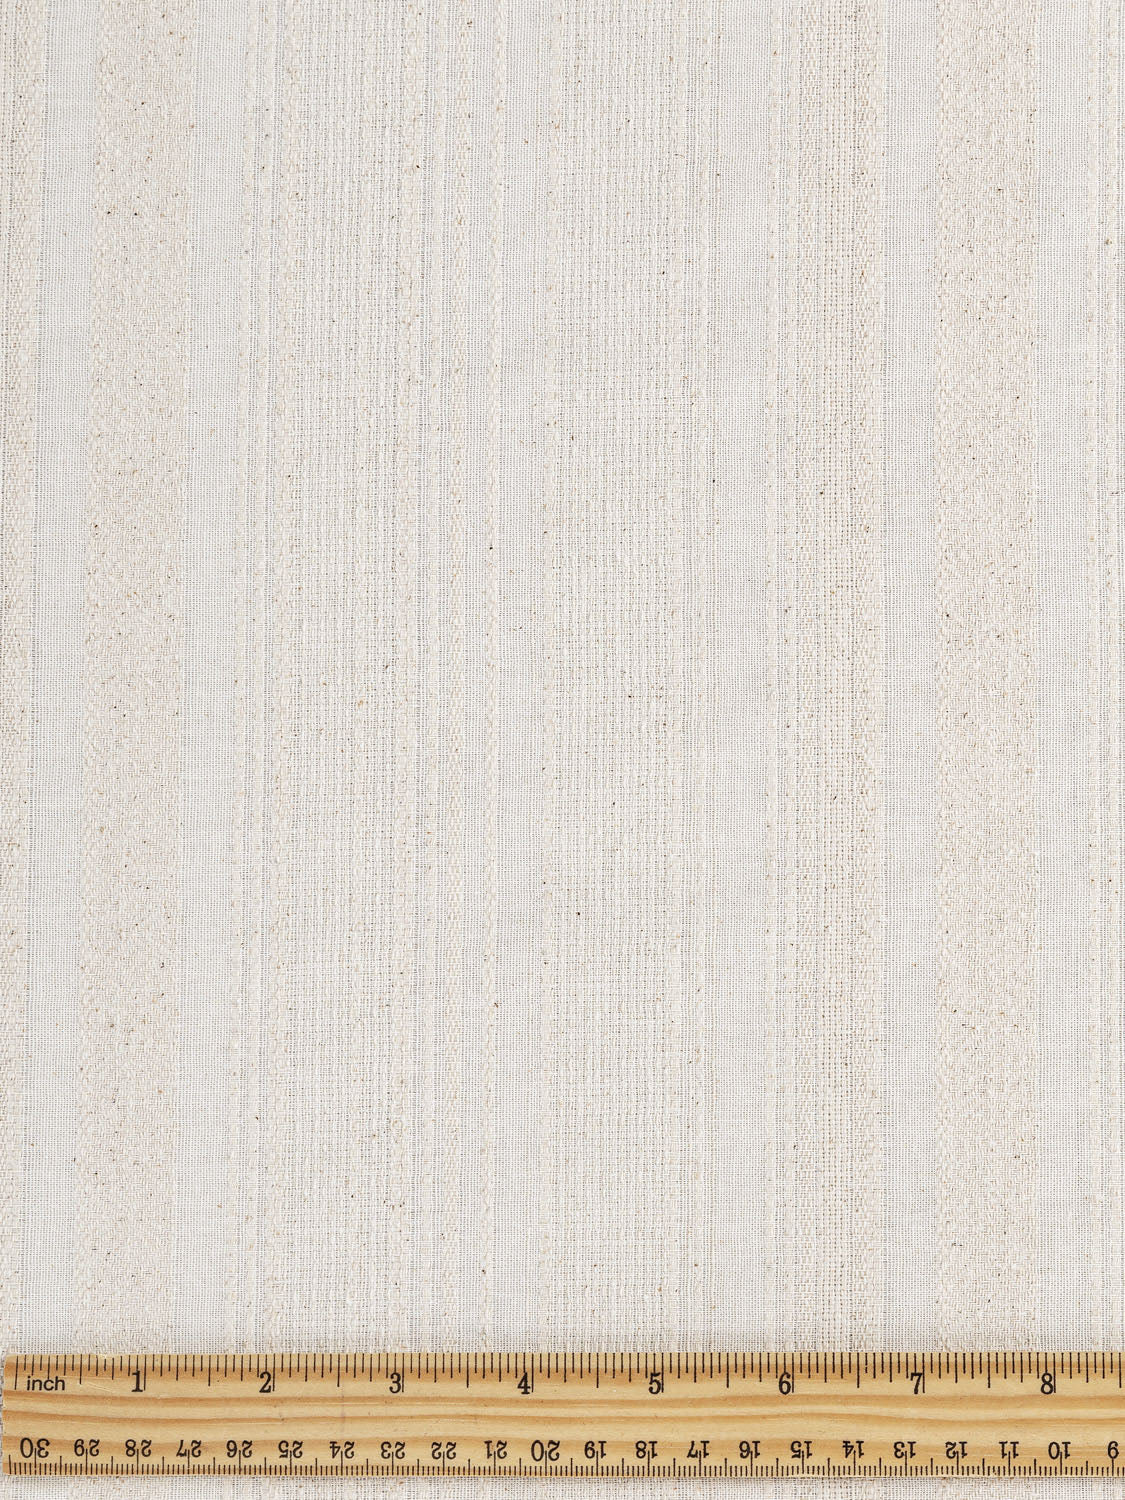 Striped Textured Recycled Cotton - Cloud + Cream | Core Fabrics